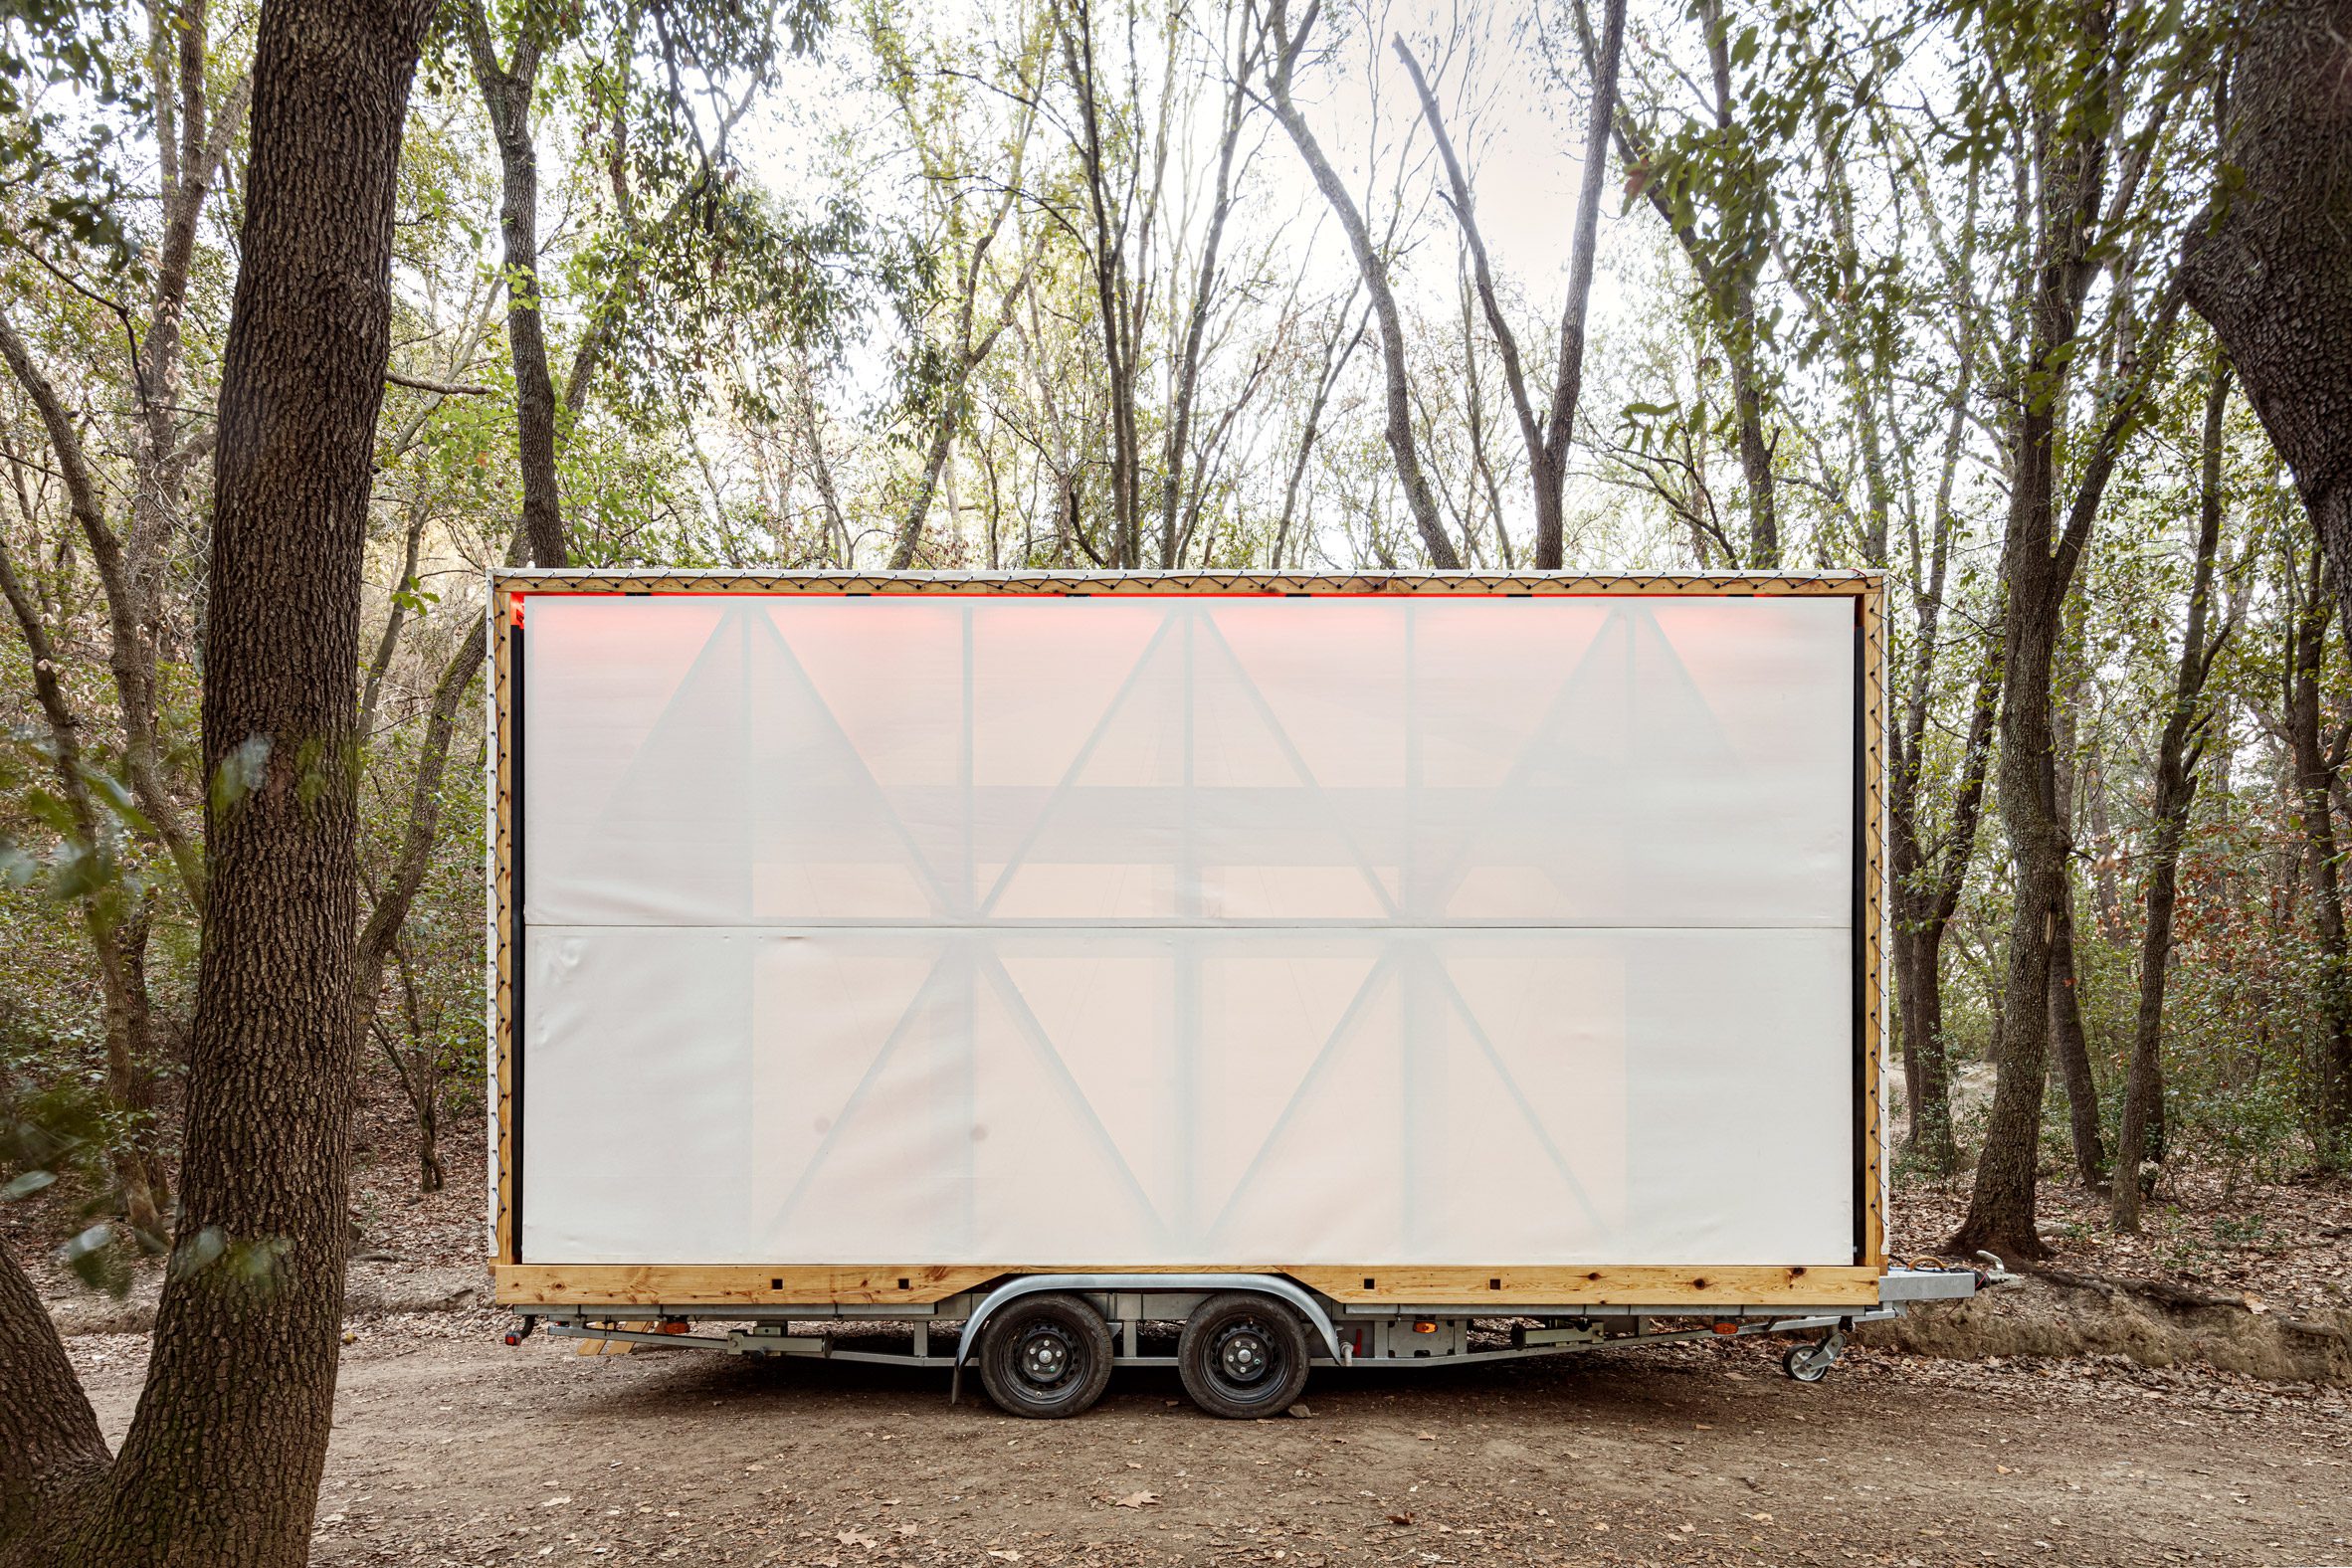 Fabric facade of the mobile Moca dwelling by Institute for Advanced Architecture of Catalonia